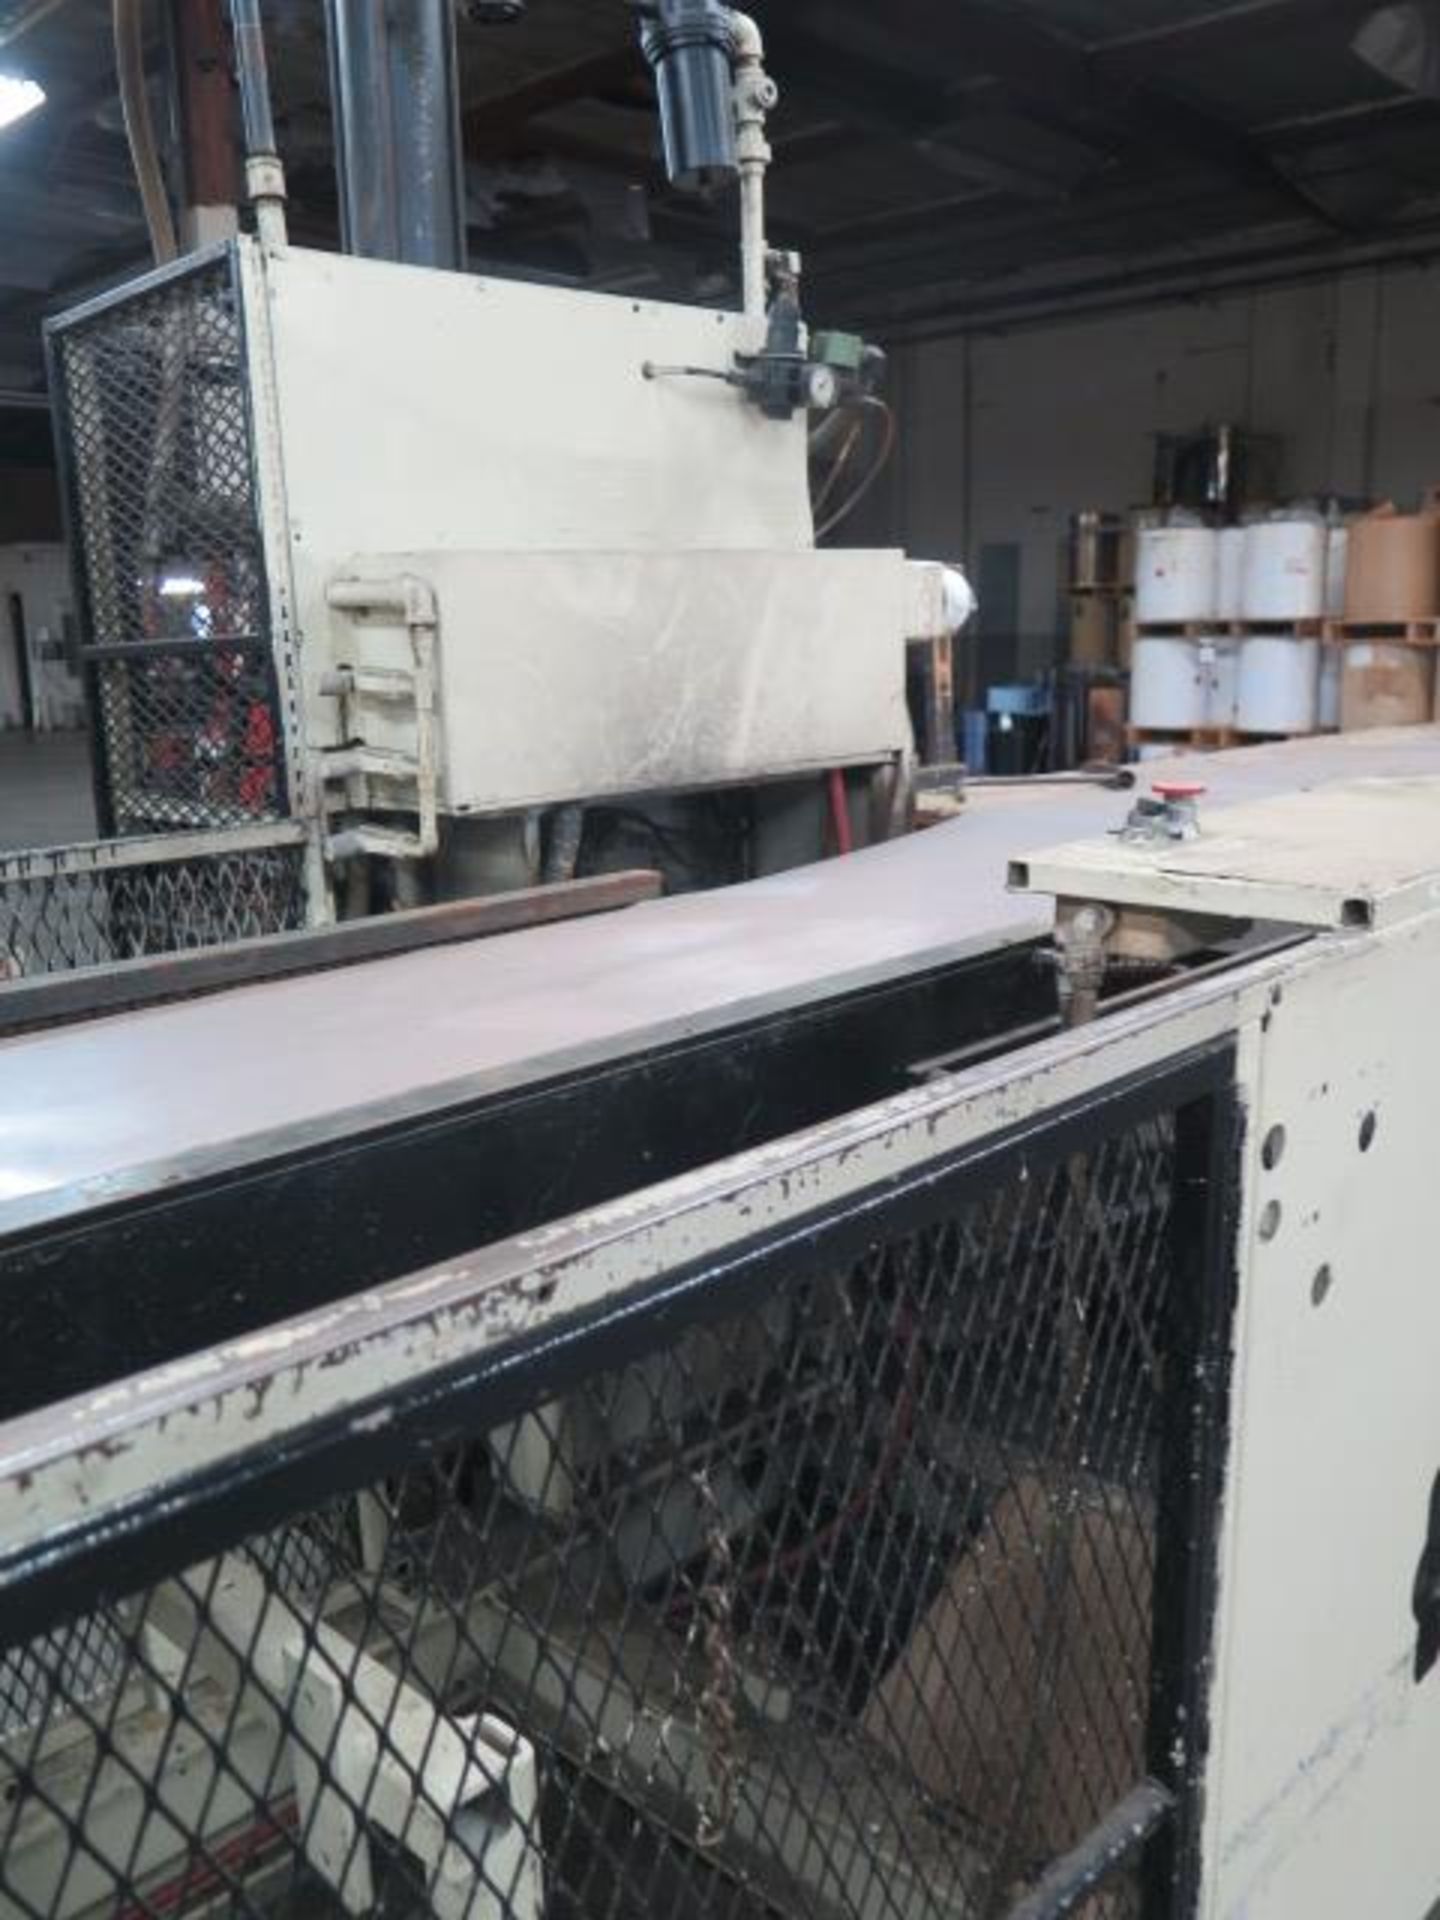 Sencorp Systems Thermoforming w/ Sencorp Controls, Film Preheater, 10” x 30” Vacuum, SOLD AS IS - Image 25 of 30